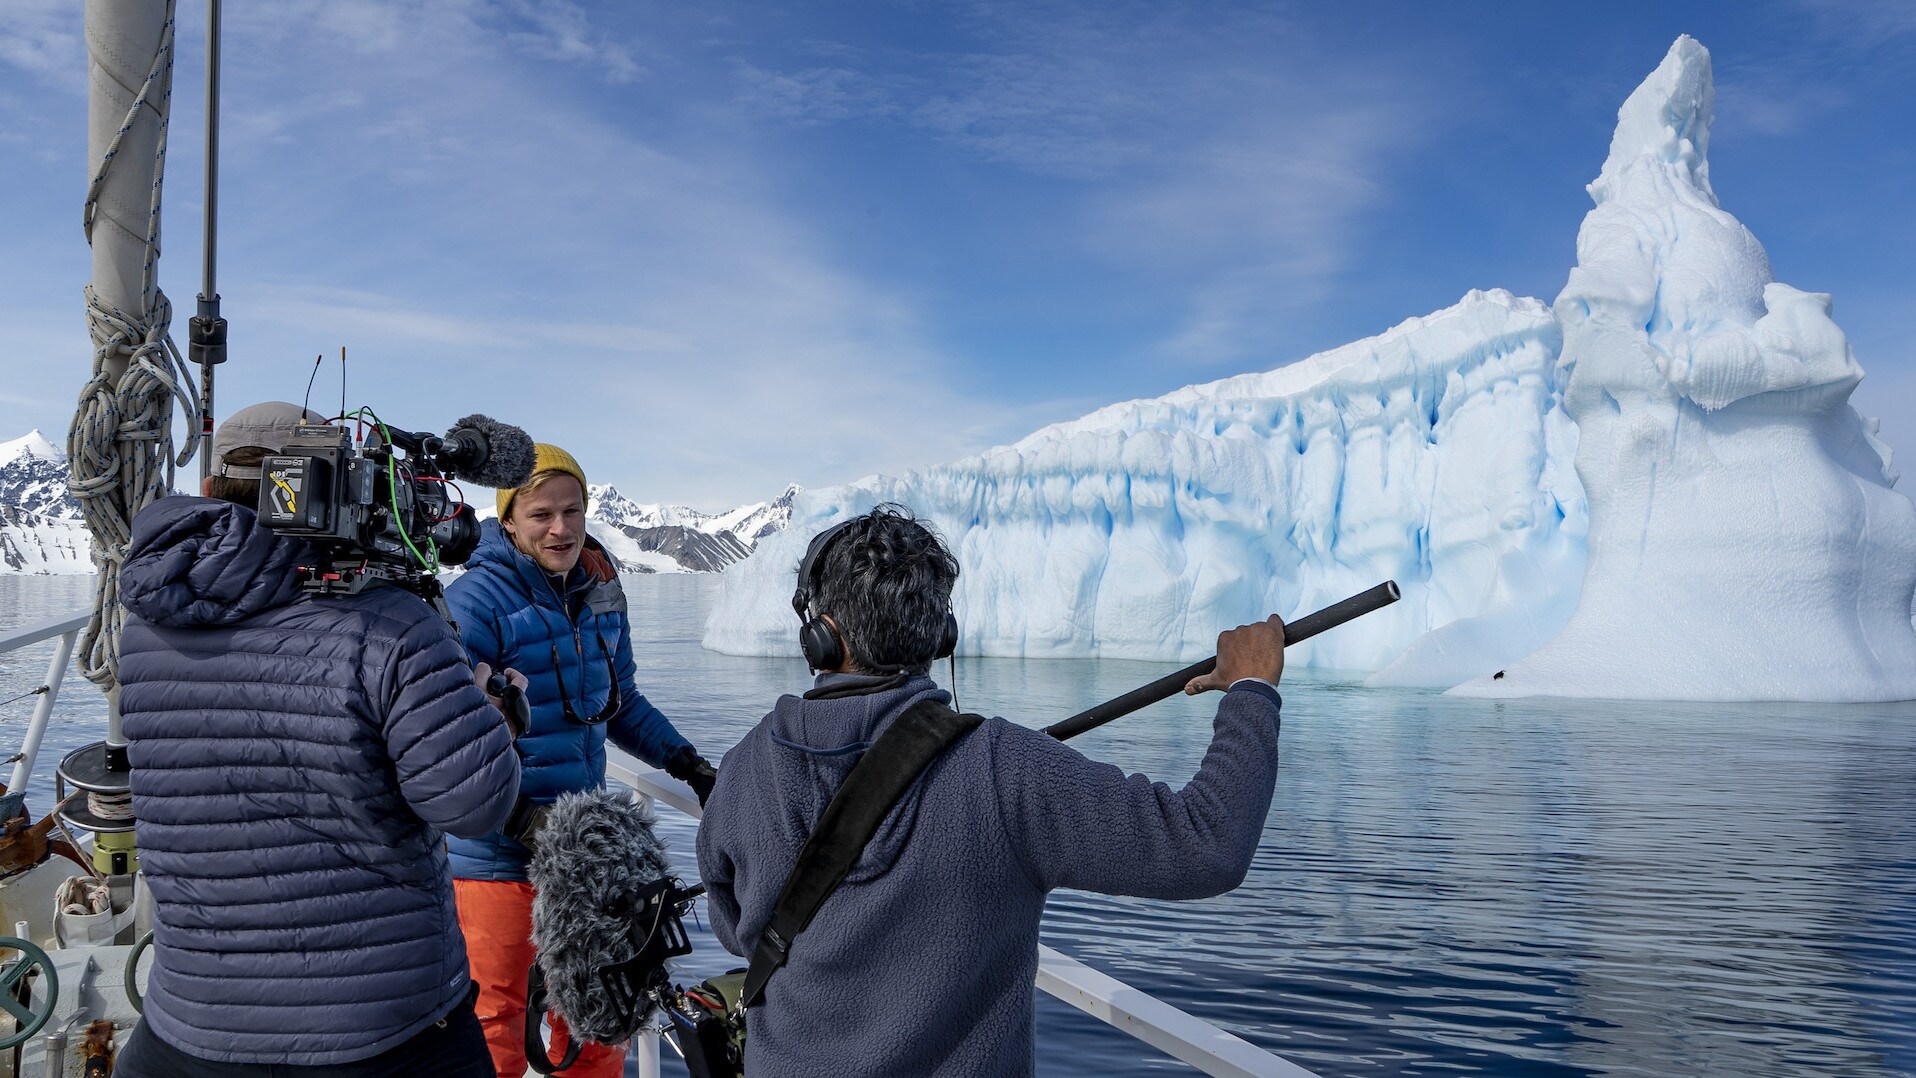 Bertie Gregory with camera operator and sound recordist, recording a piece to camera in front of a large iceberg. (credit: National Geographic for Disney+/Anna Dimitriadis)